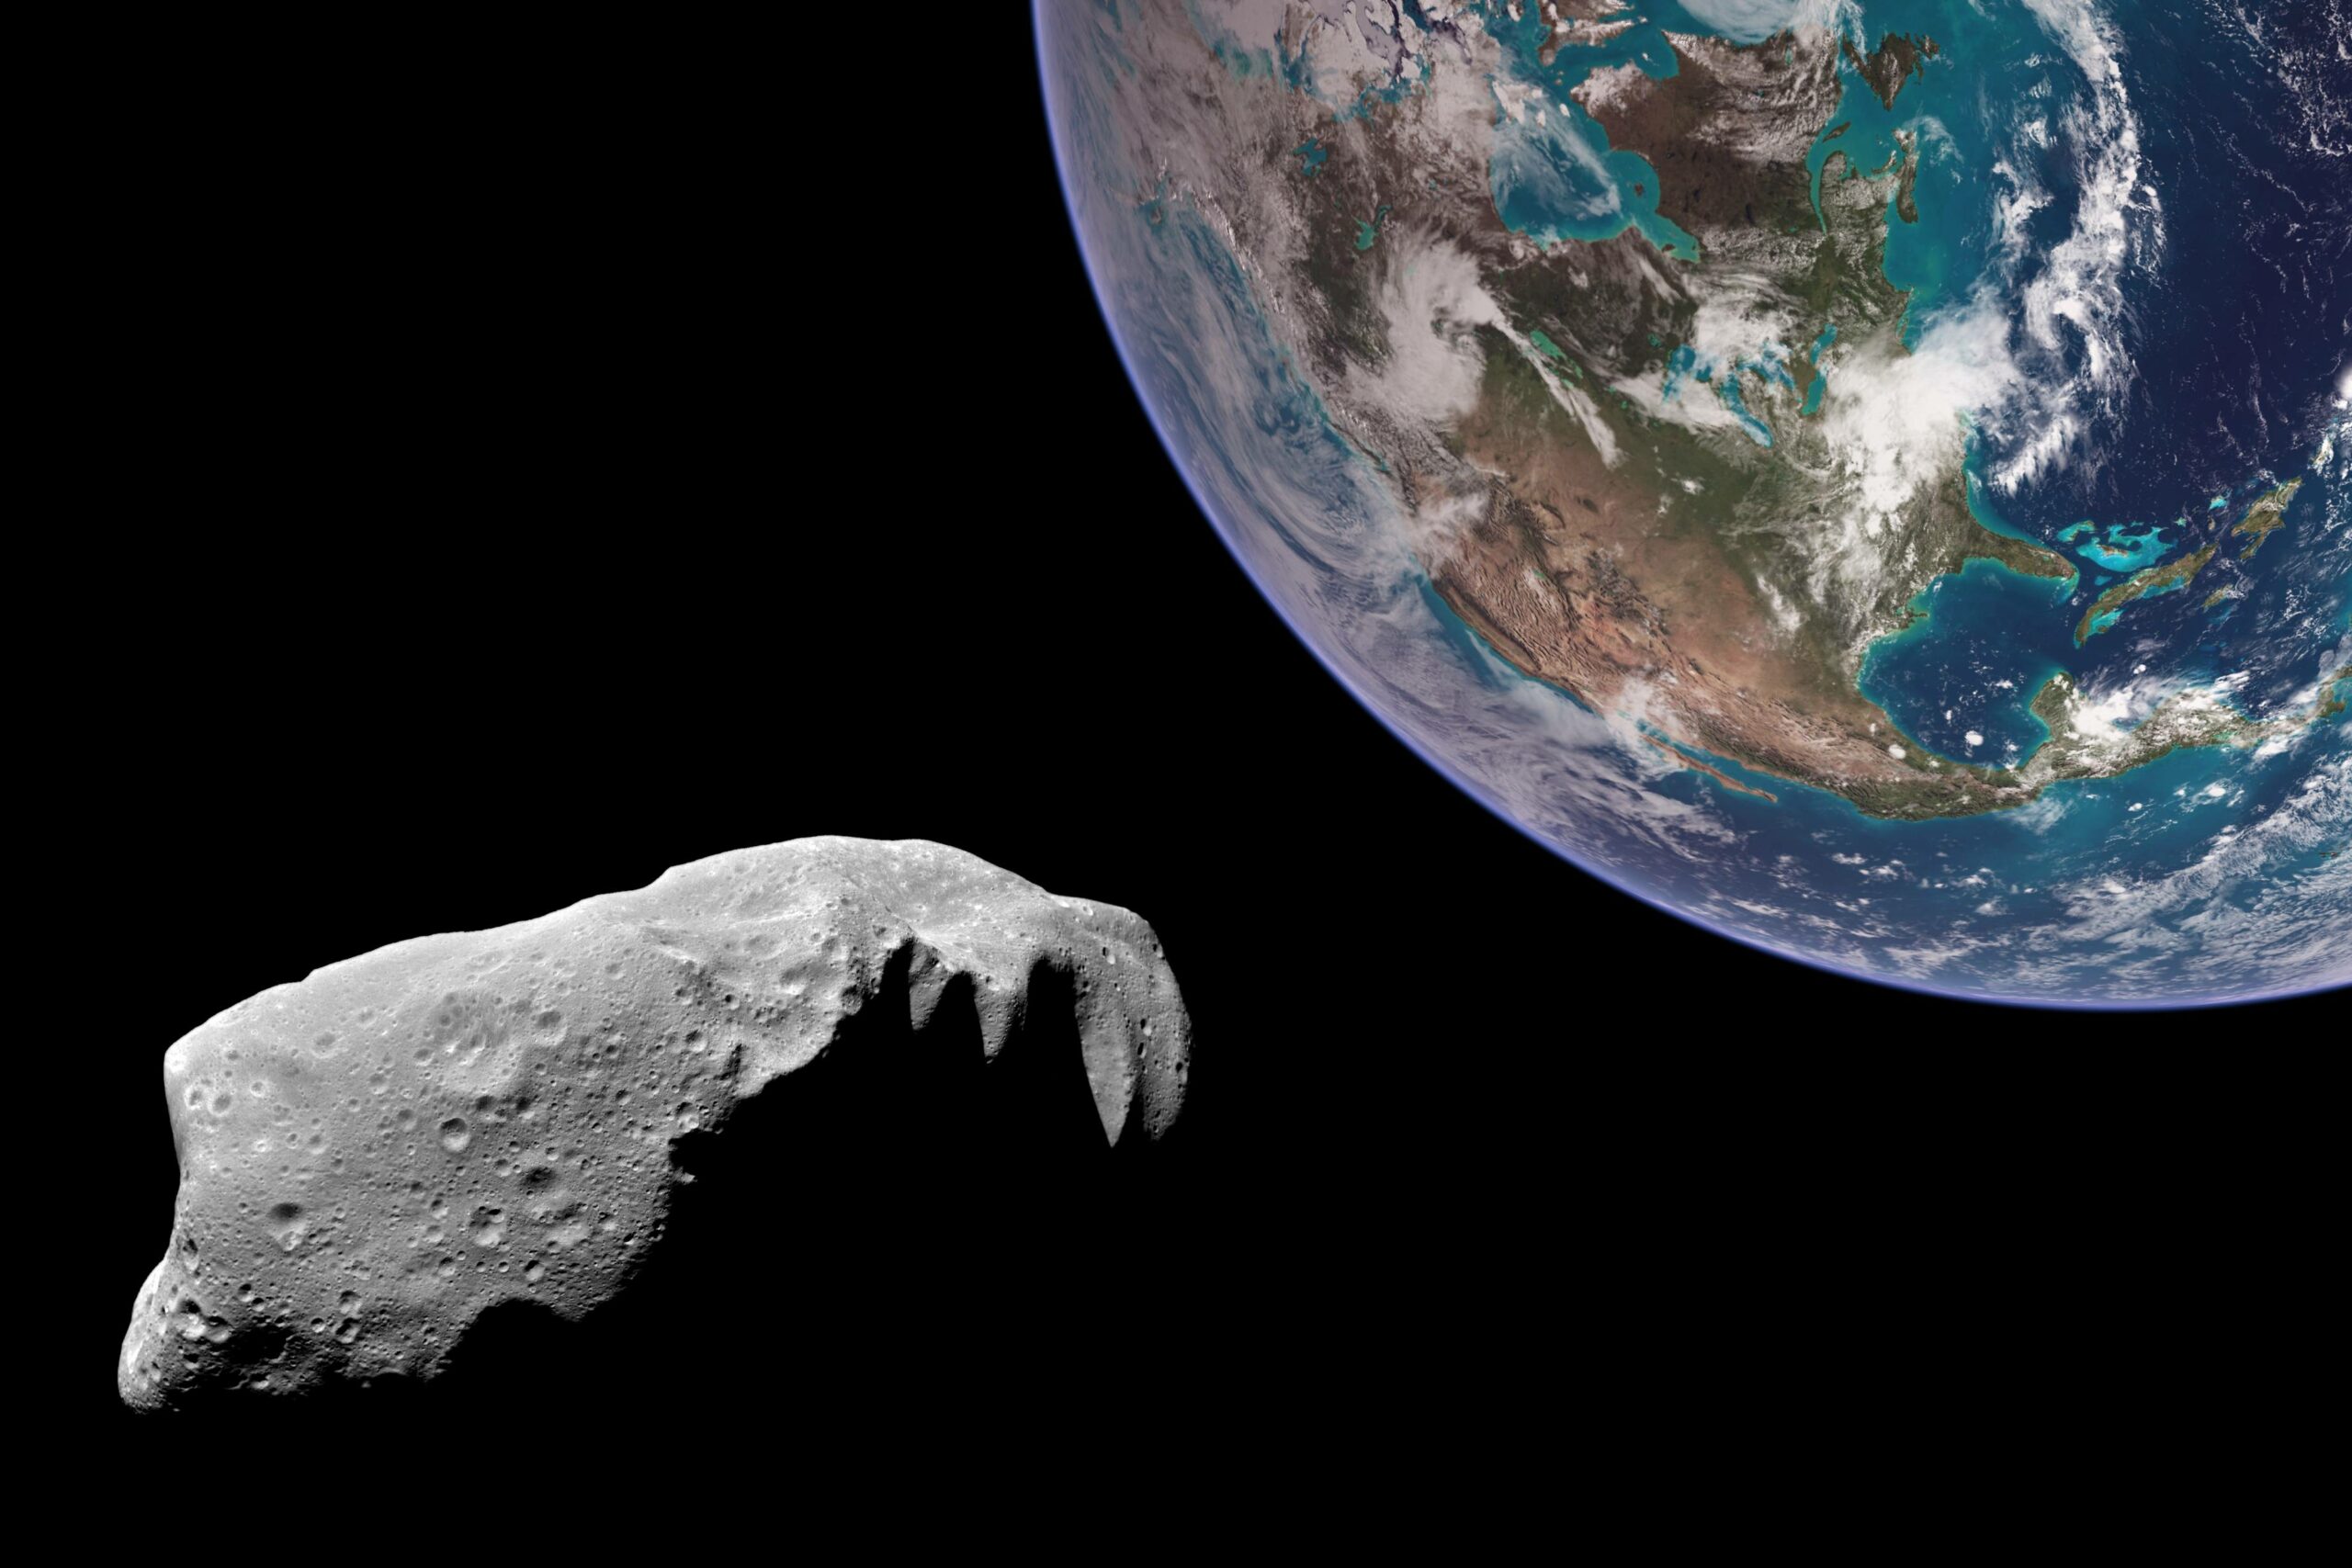 Asteroids deal with breakups better than we thought